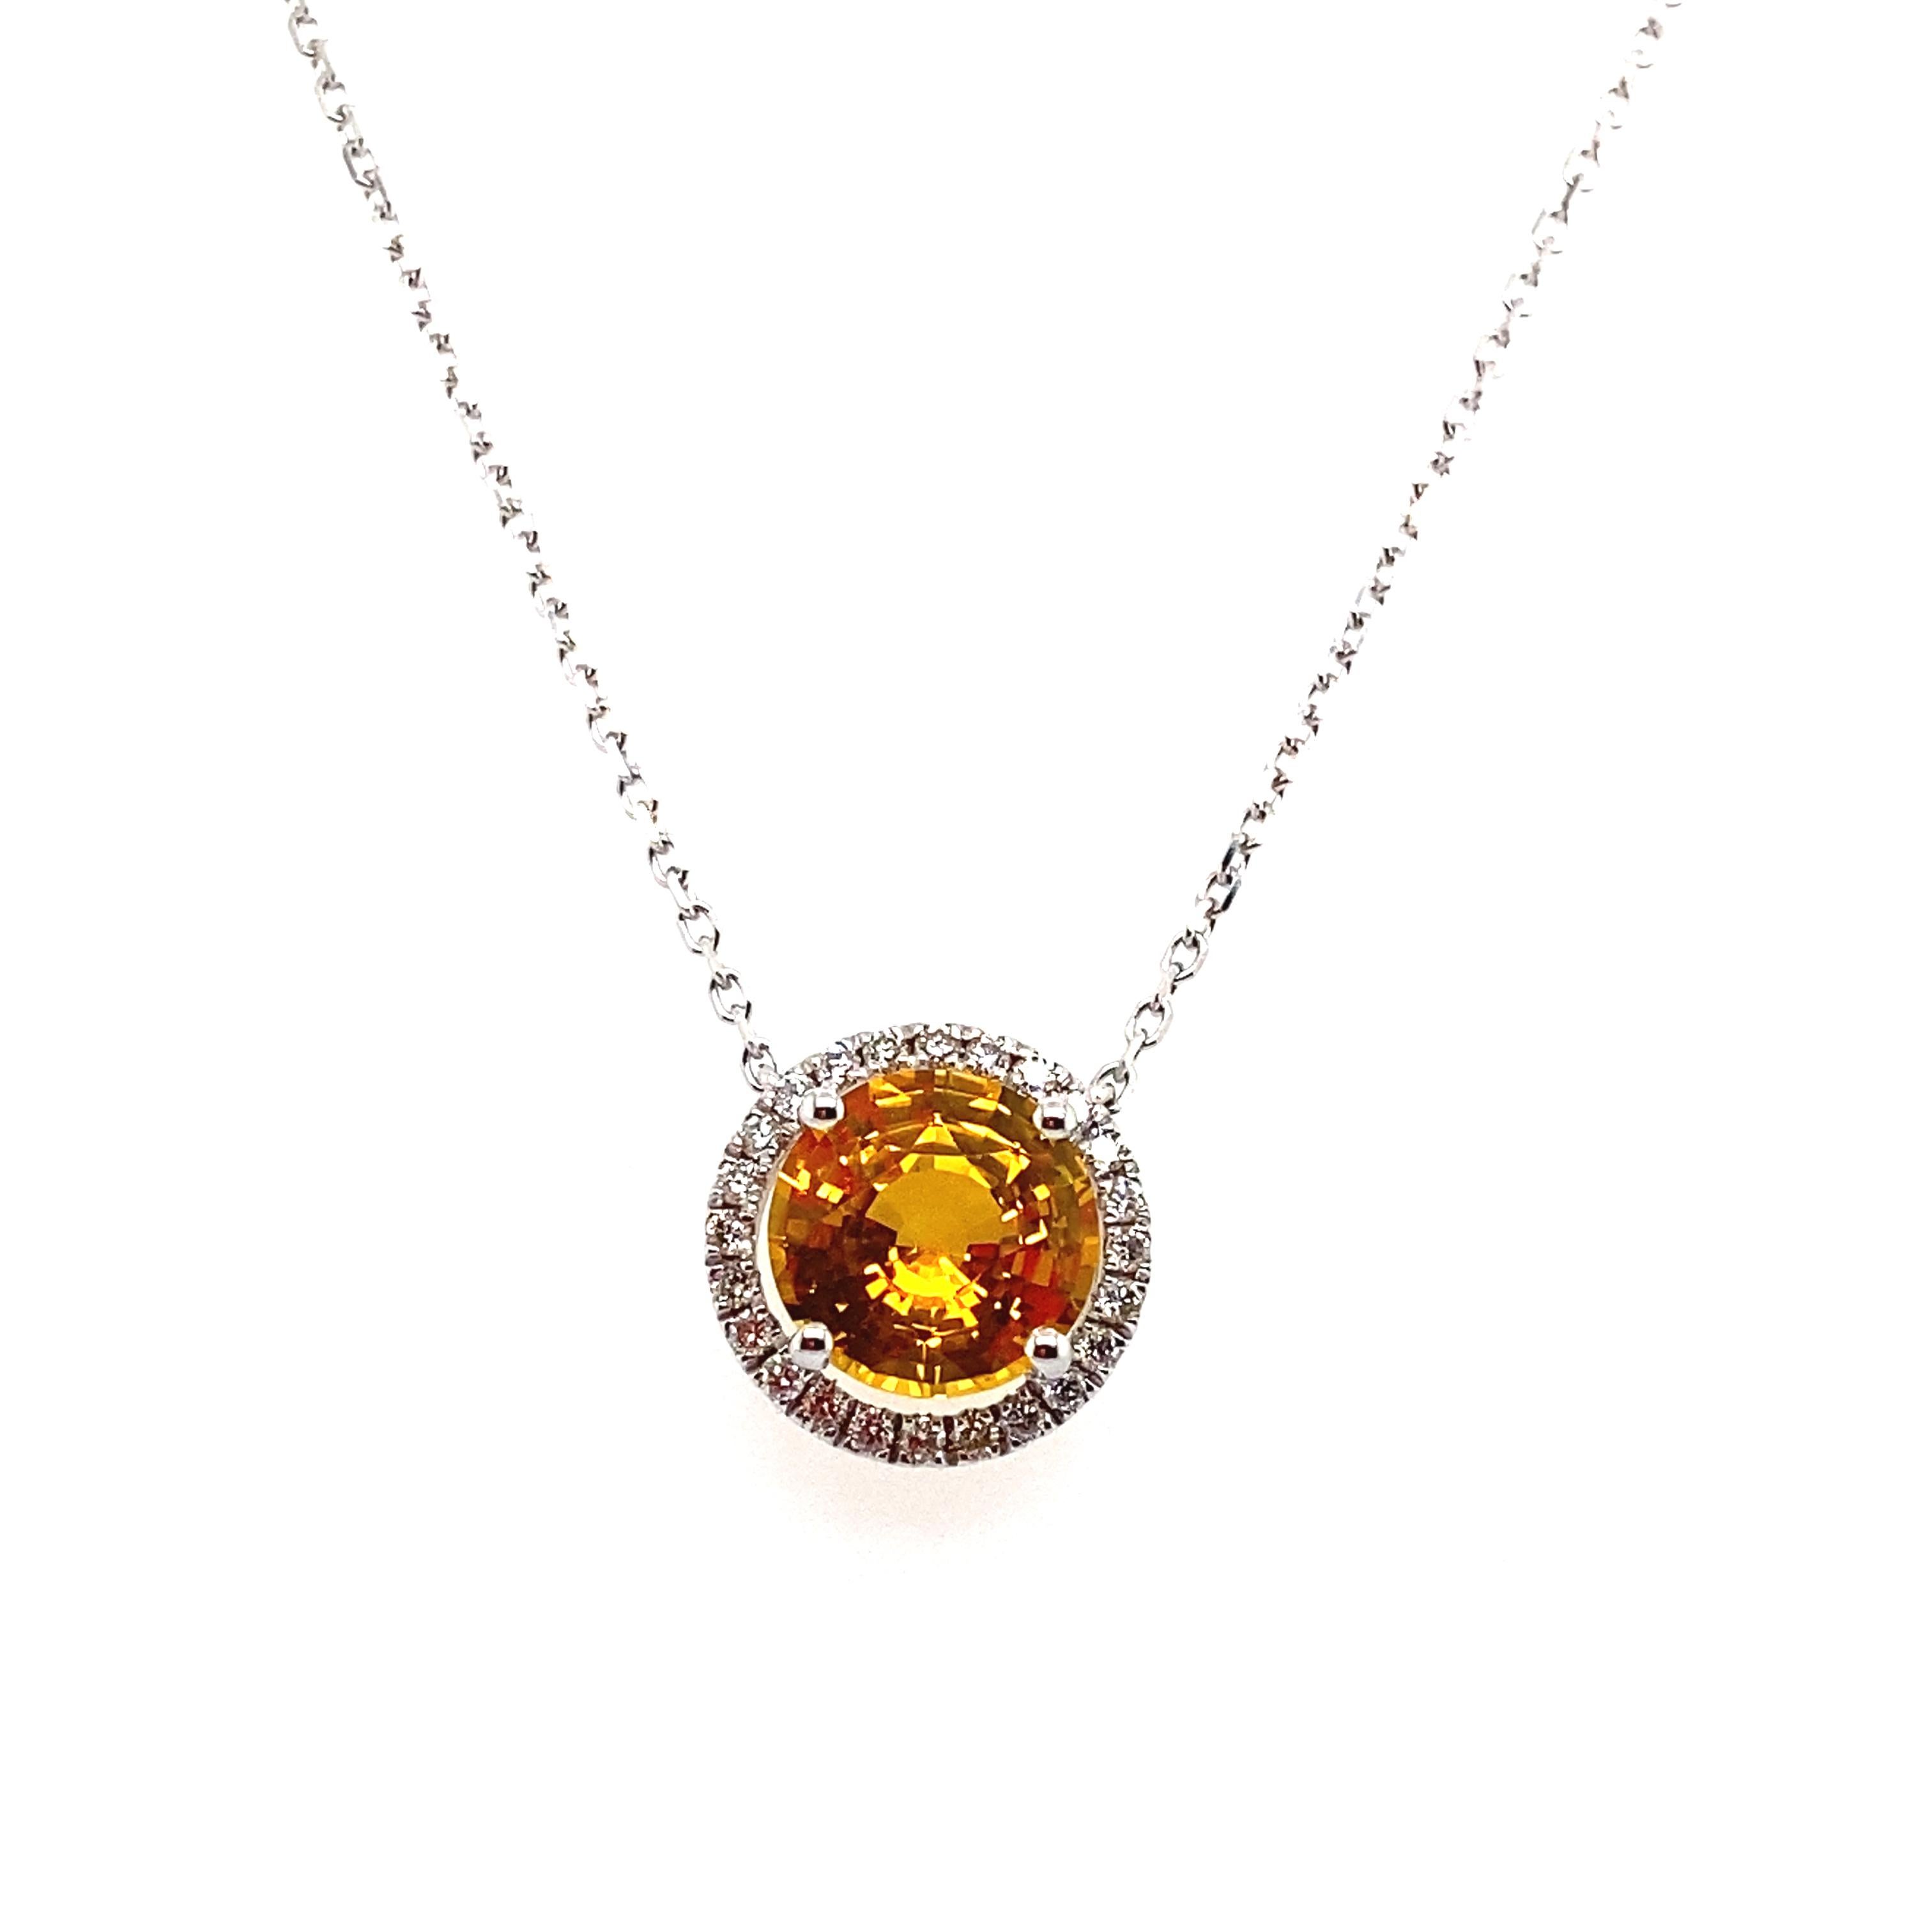 2.11 Carat Round-Cut Yellow Sapphire and White Diamond Pendant Necklace:

A beautiful pendant necklace, it features a 2.11 carat round-cut Sri Lankan yellow sapphire in the centre surrounded by a halo of white round-brilliant cut diamonds weighing